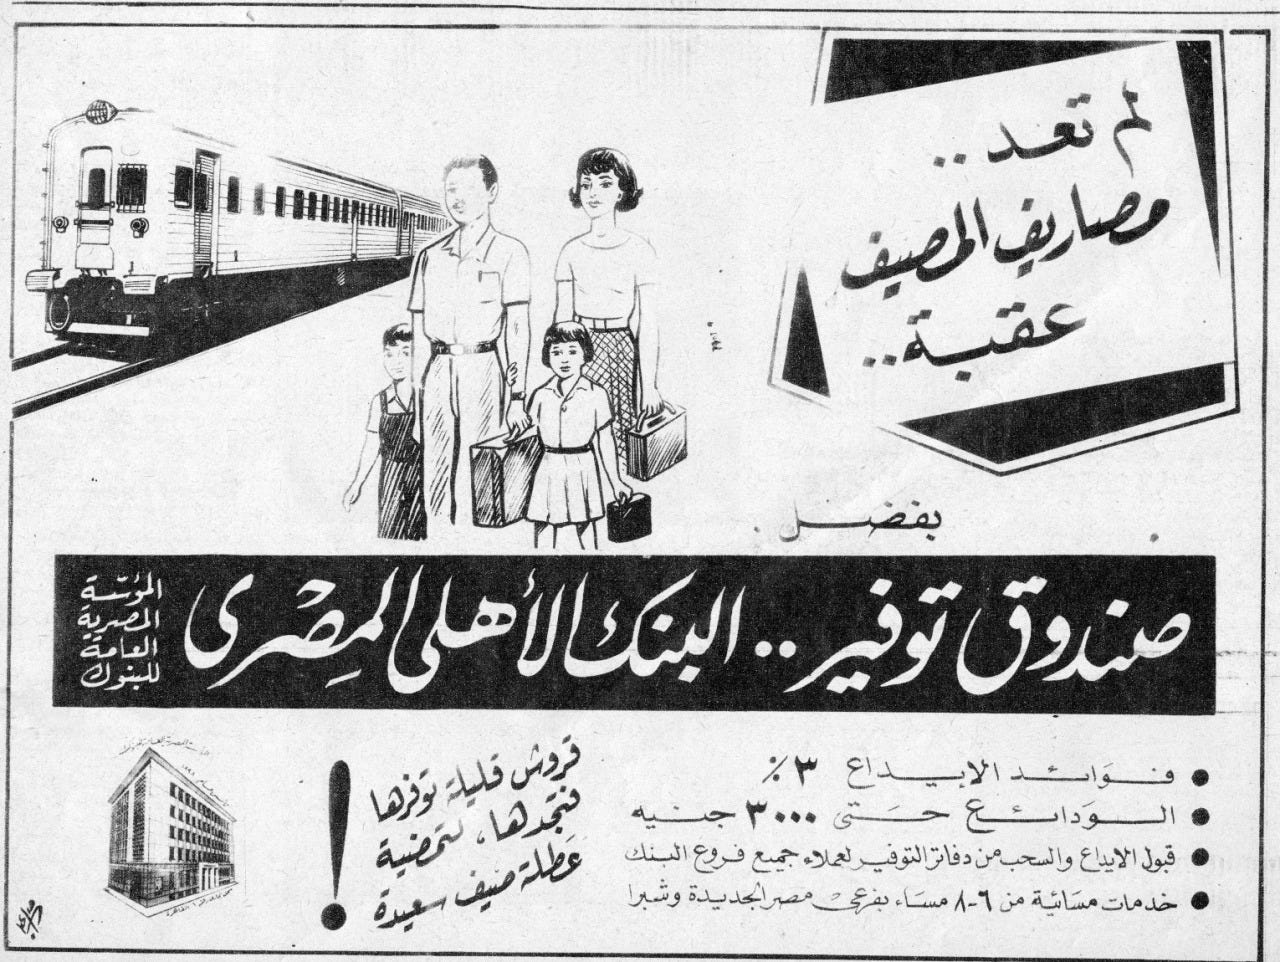 Ahli Bank ad (save money for summer travel), 1950s